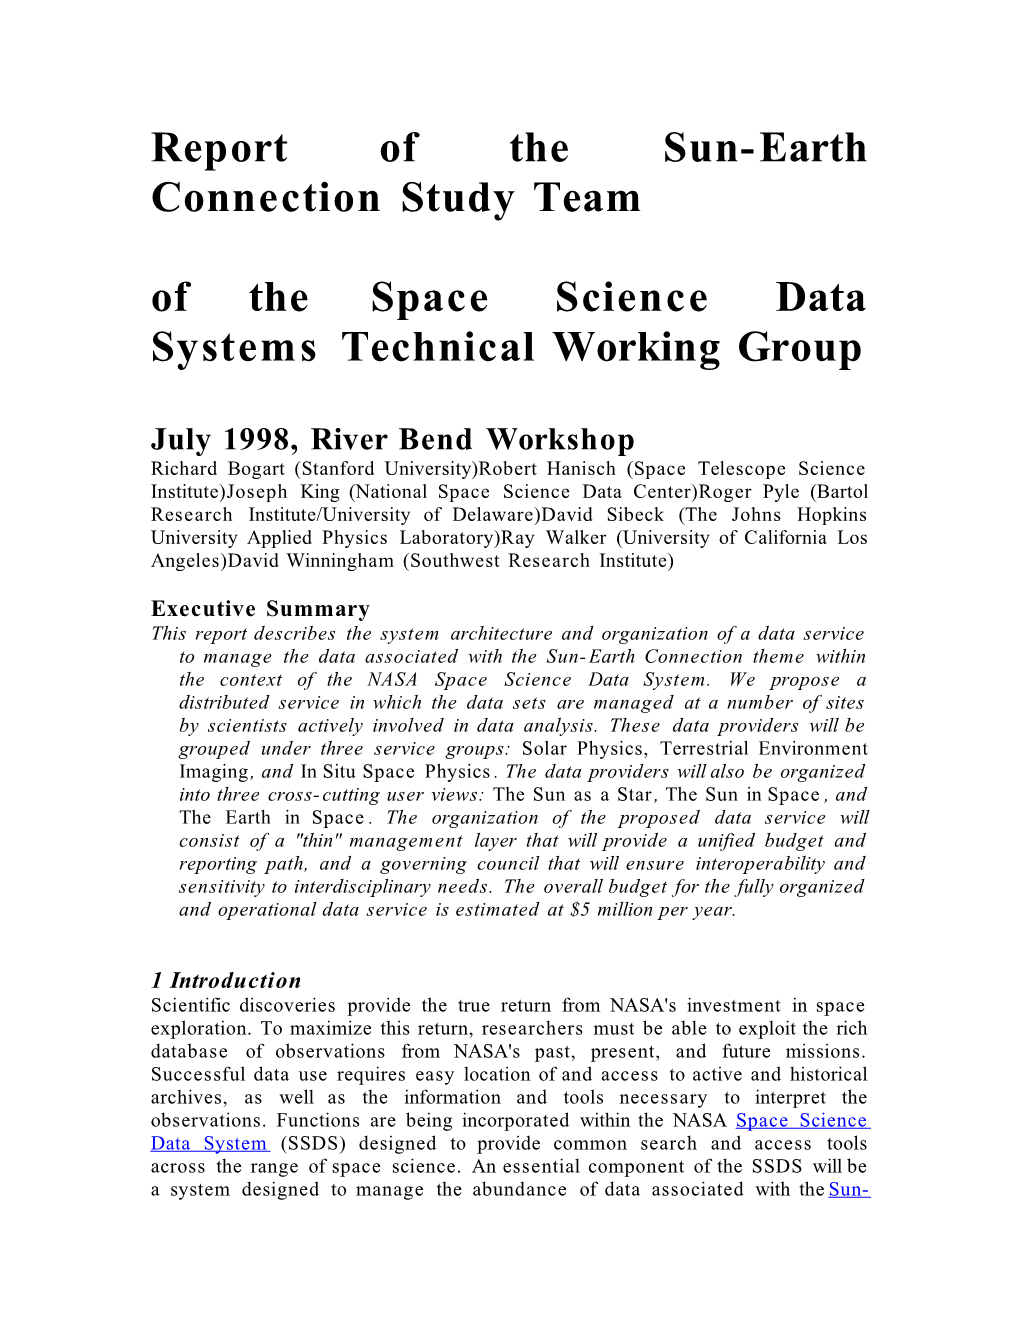 Report of the Sun-Earth Connection Study Team